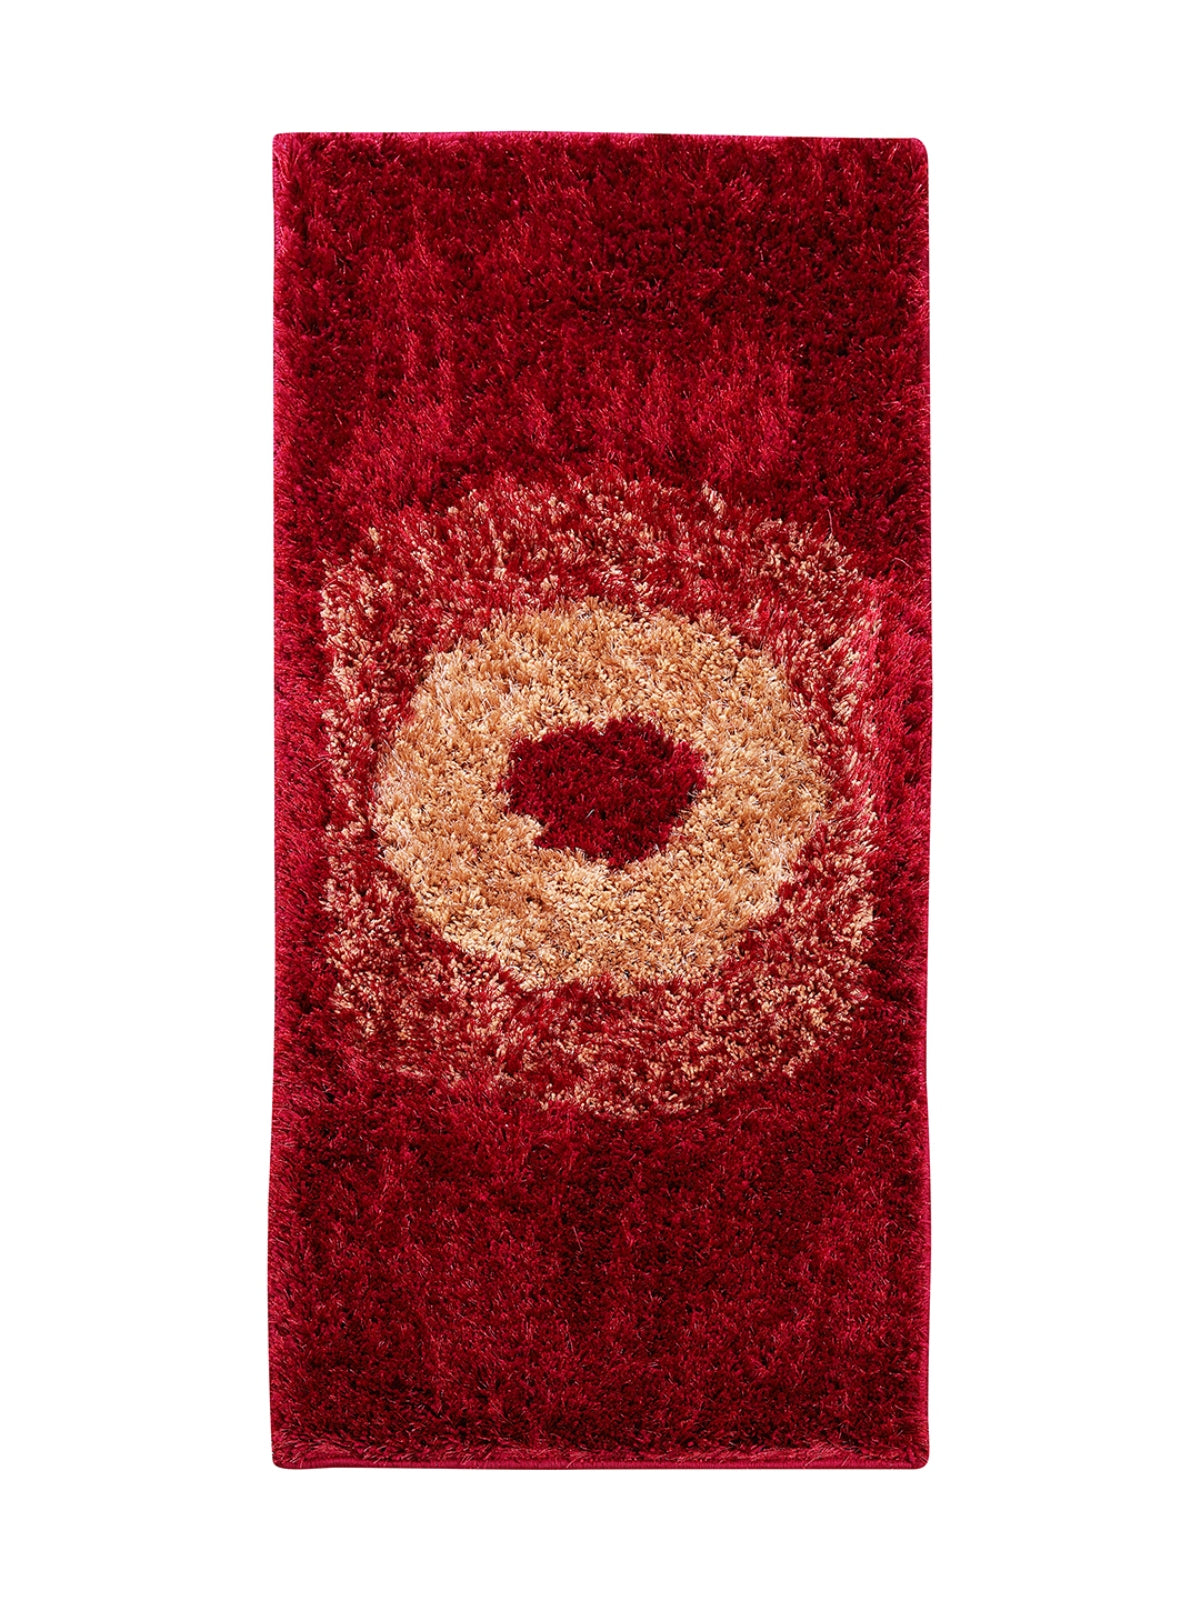 Red & Gold 22 inch x 55 inch Abstract Patterned Bed Runner